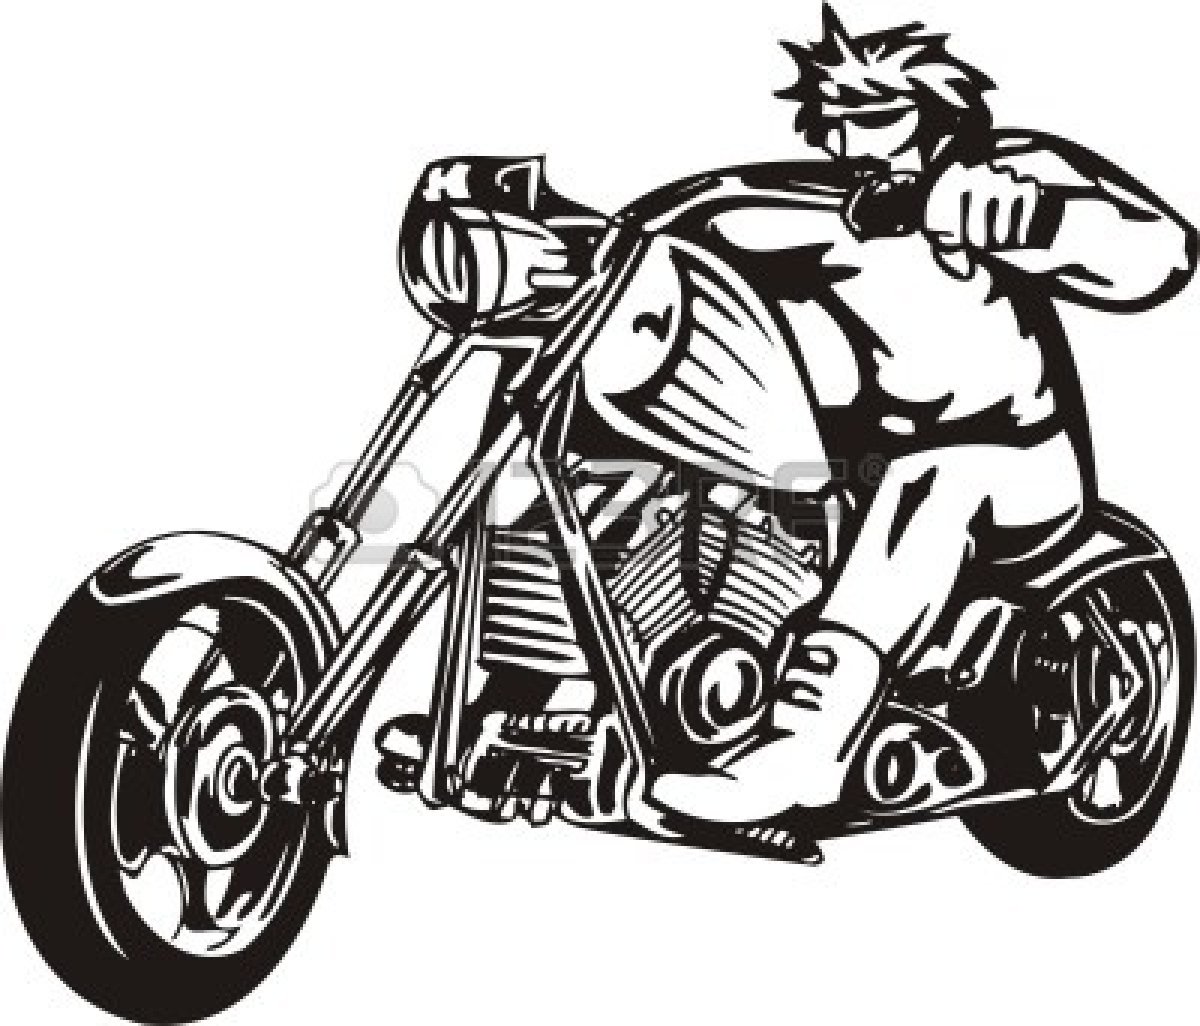 This hot motorcycle clip art 